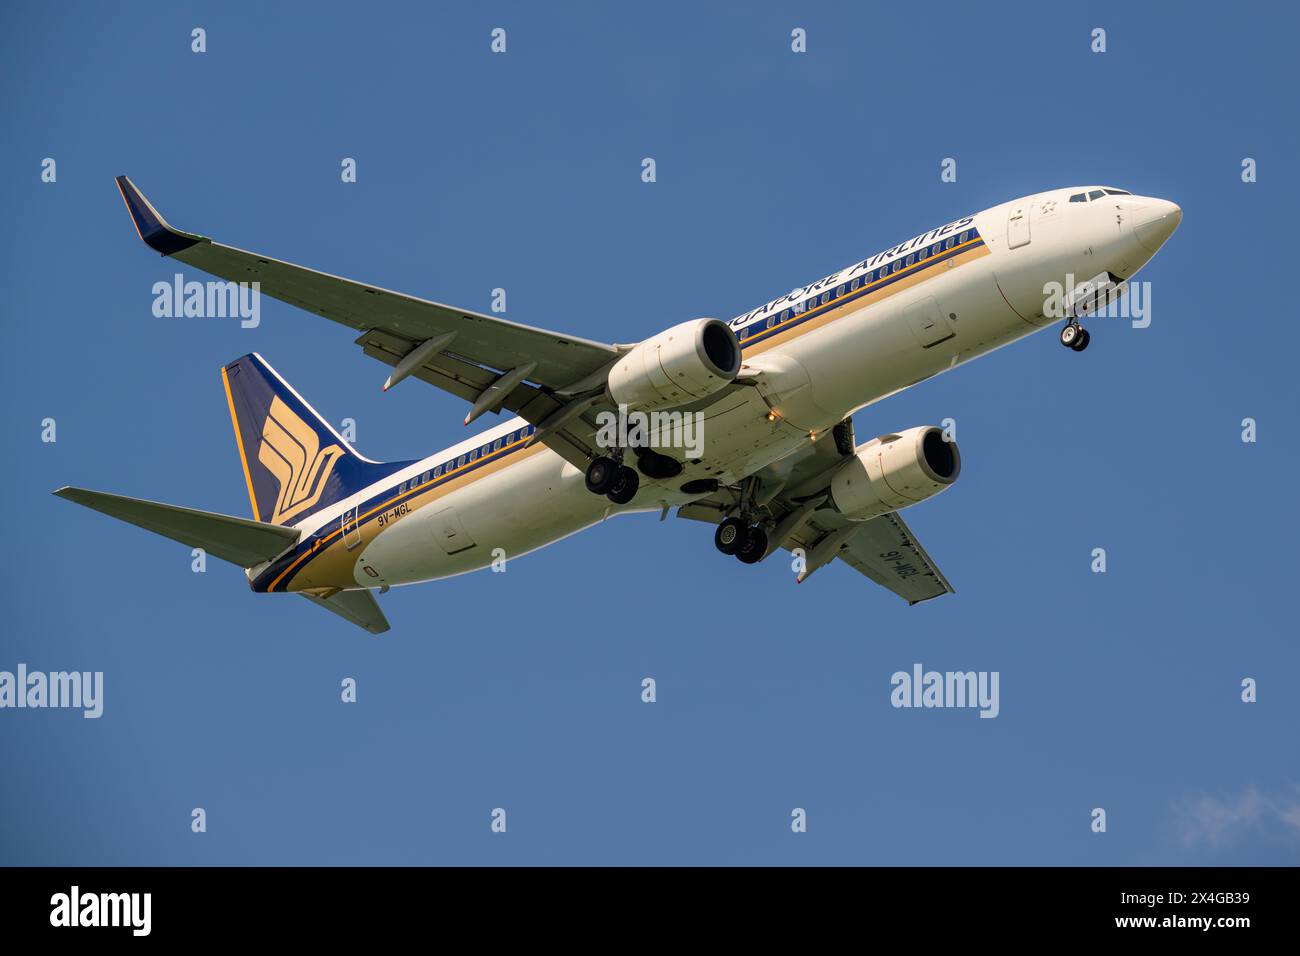 Singapore Airlines, Boeing 737-800, 9V-MGL, on final approach to Singapore Changi airport Stock Photo